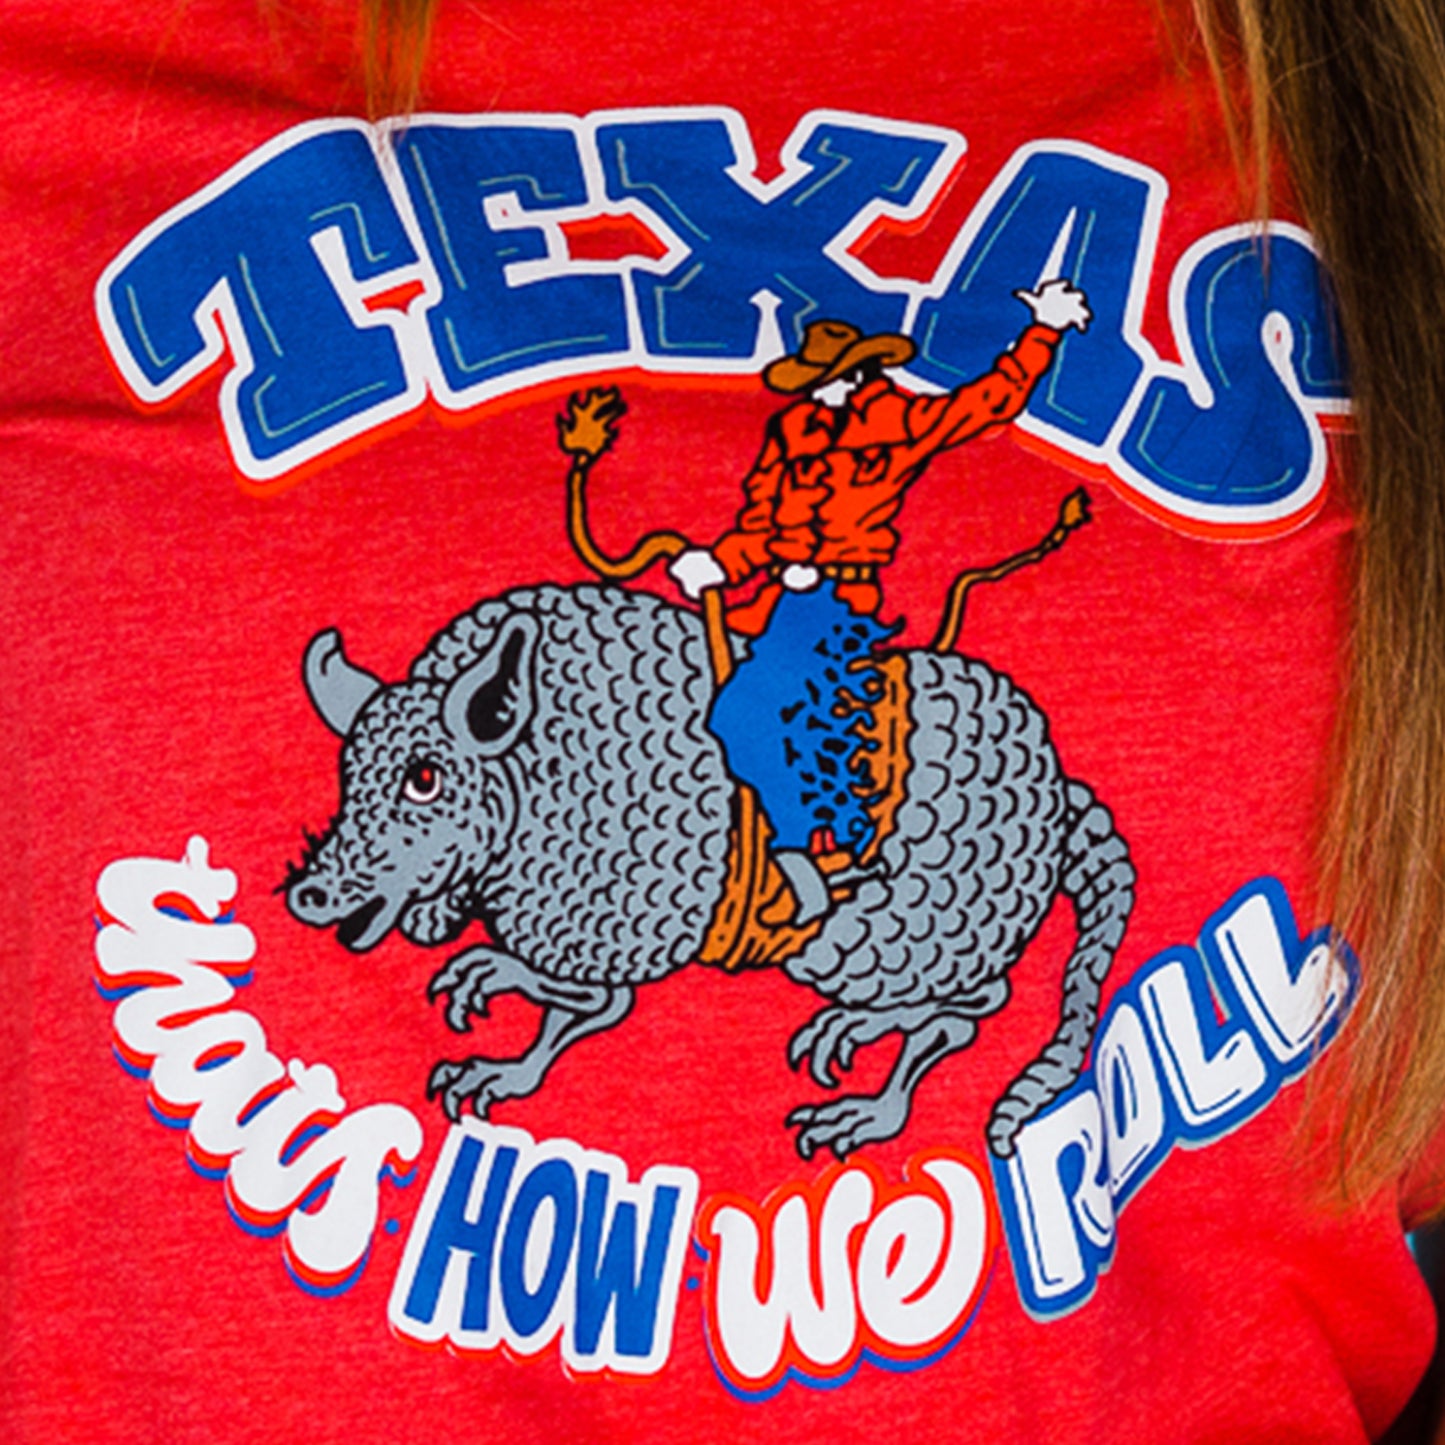 Texas - That's How We Roll Tee